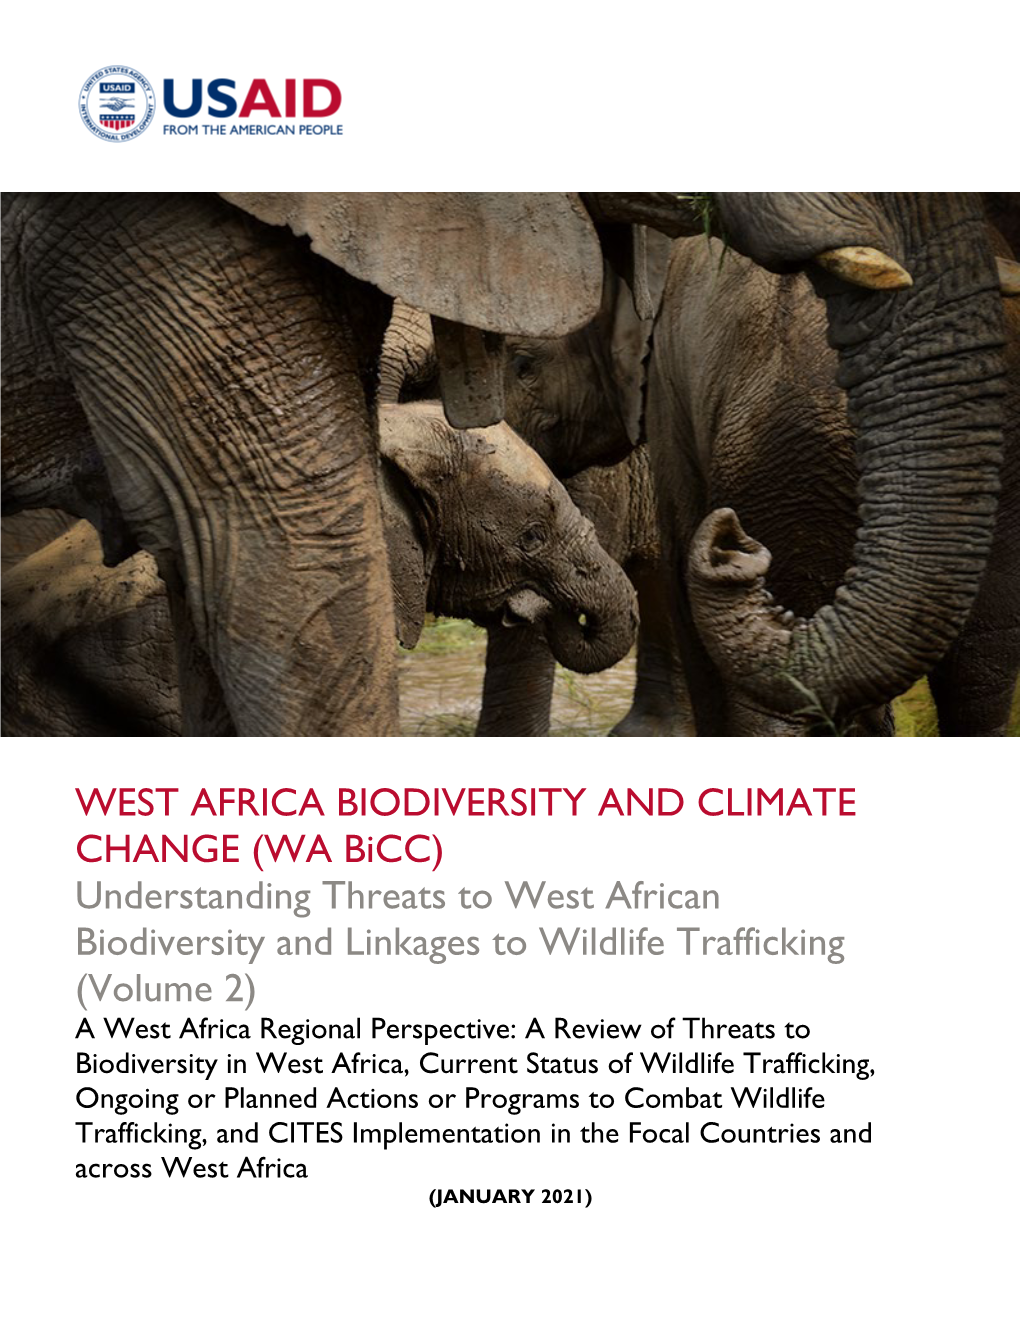 West Africa Biodiversity and Climate Change